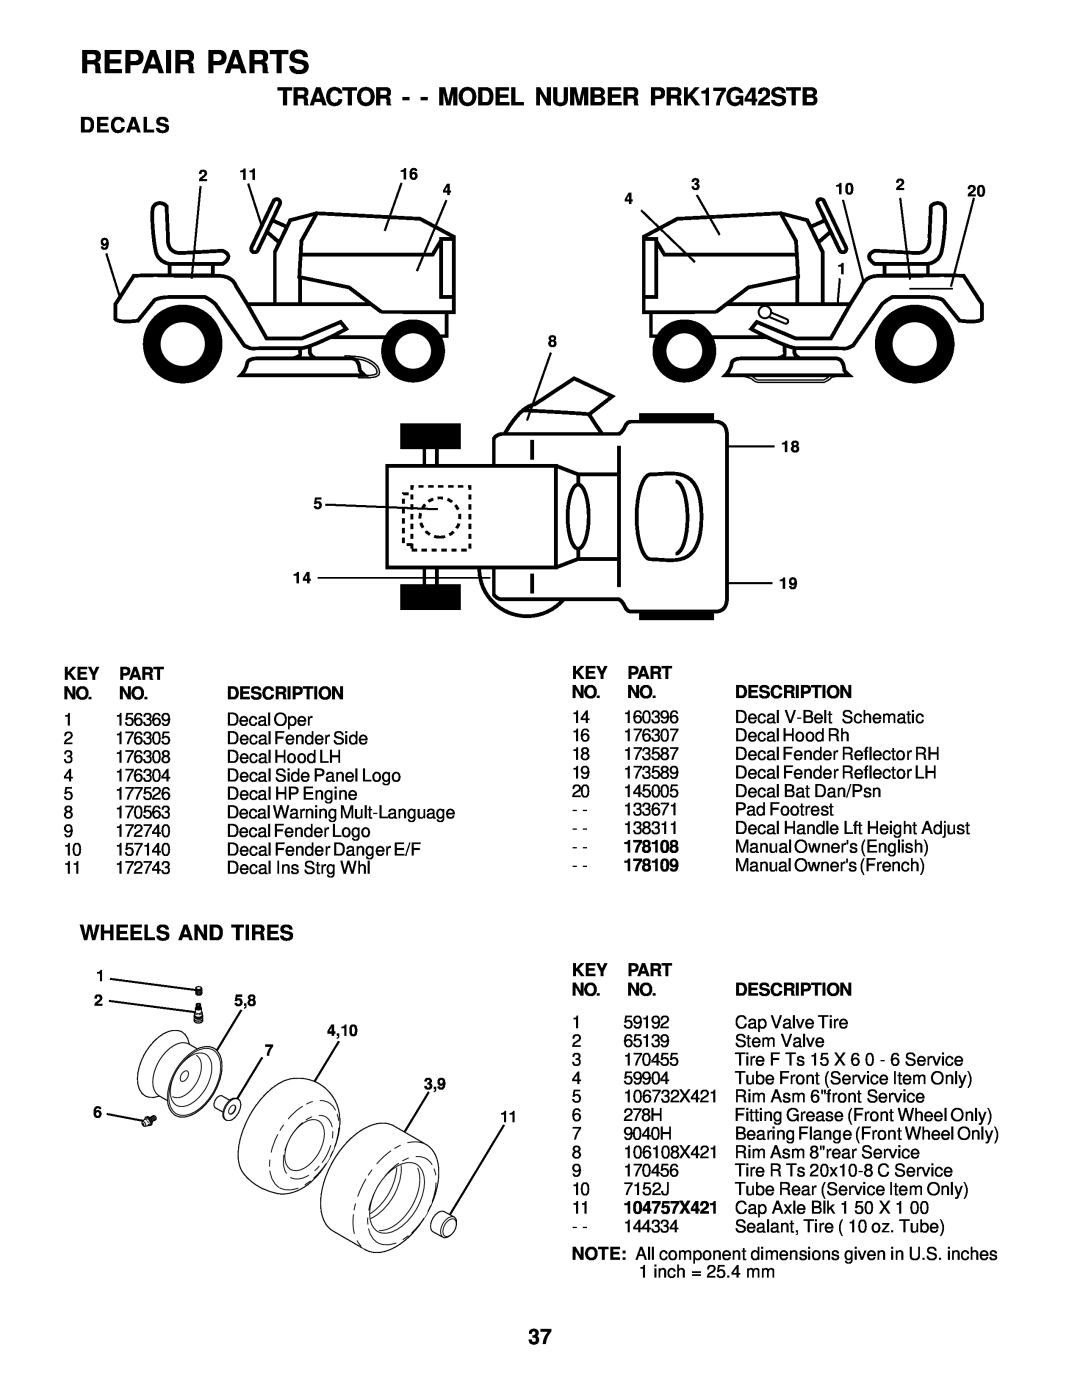 Poulan 178108 owner manual Decals, Wheels And Tires, Repair Parts, TRACTOR - - MODEL NUMBER PRK17G42STB 